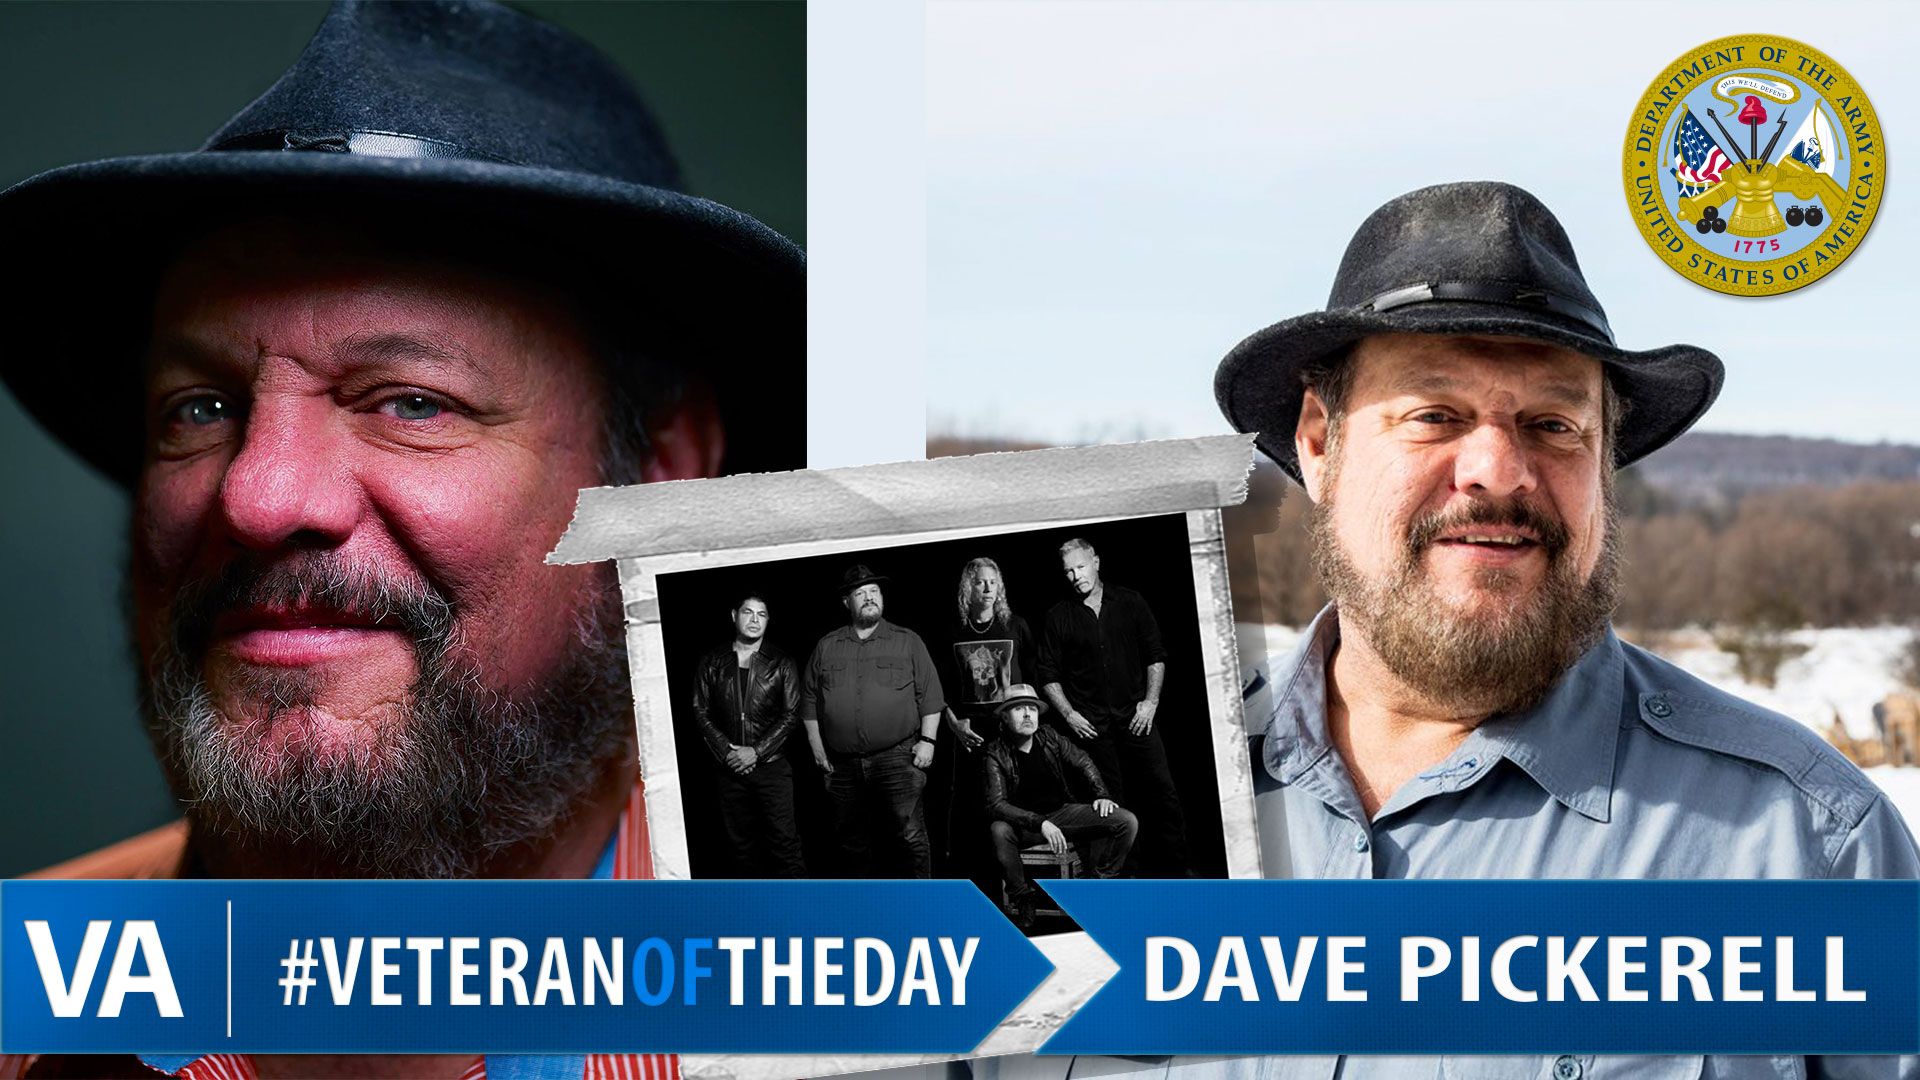 Dave Pickerell - Veteran of the Day